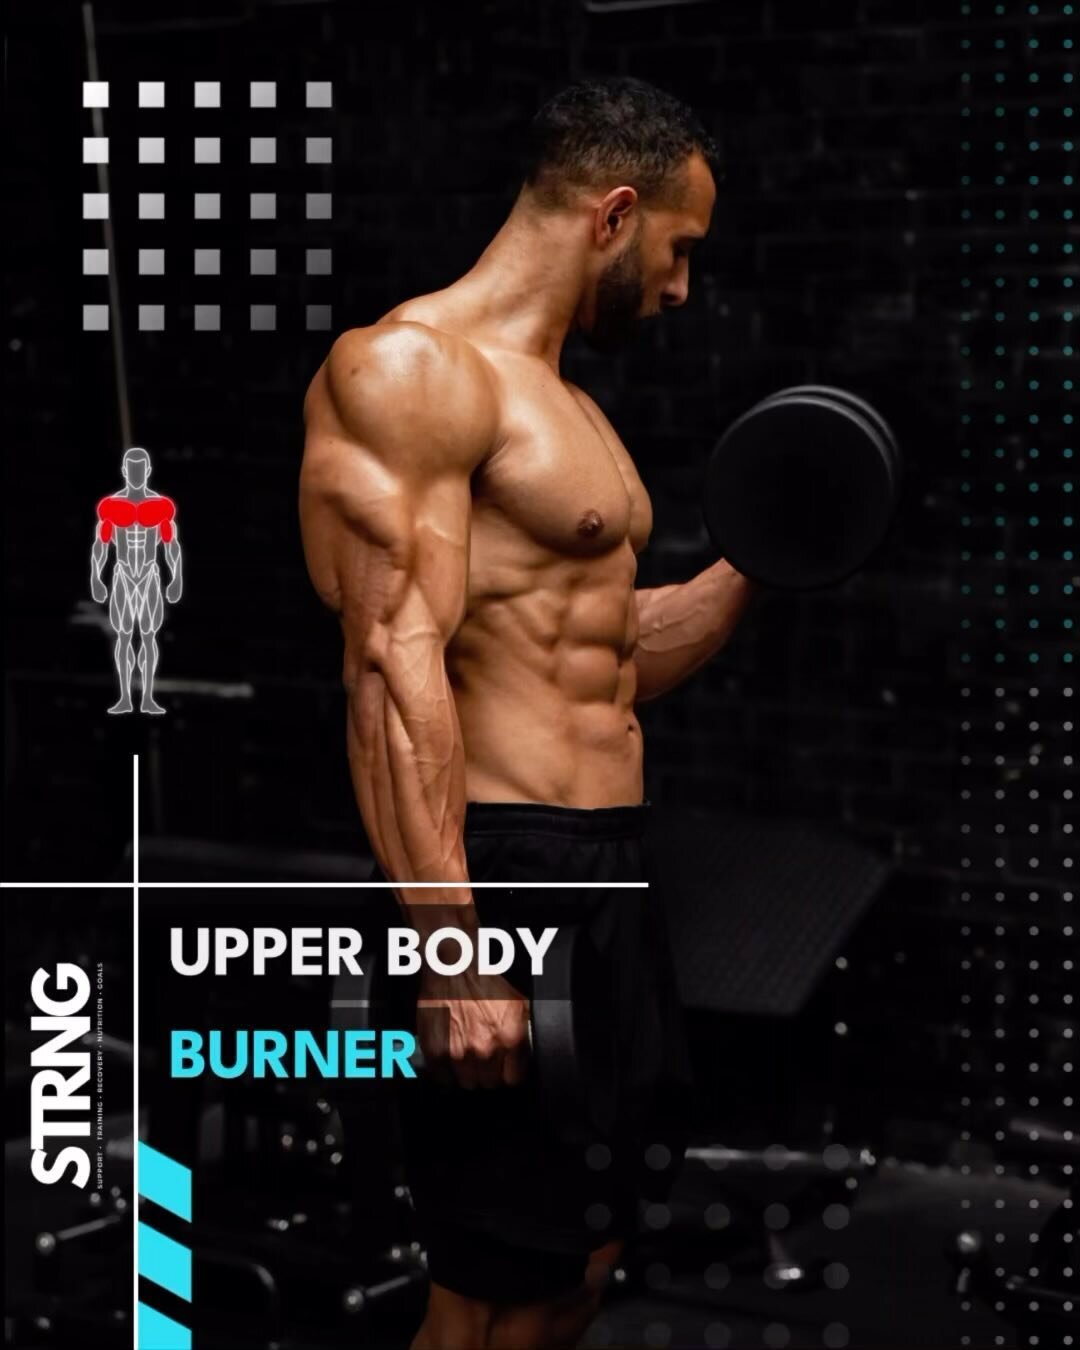 It's an UPPER workout today with STRNG trainer Romane 💪 @romanestrng 

You can find this exact workout on the STRNG fitness app. Head to the Workouts section of the app and filter by Gym and Arms workouts! 

Drop a 🔥 emoji and tag your workout budd